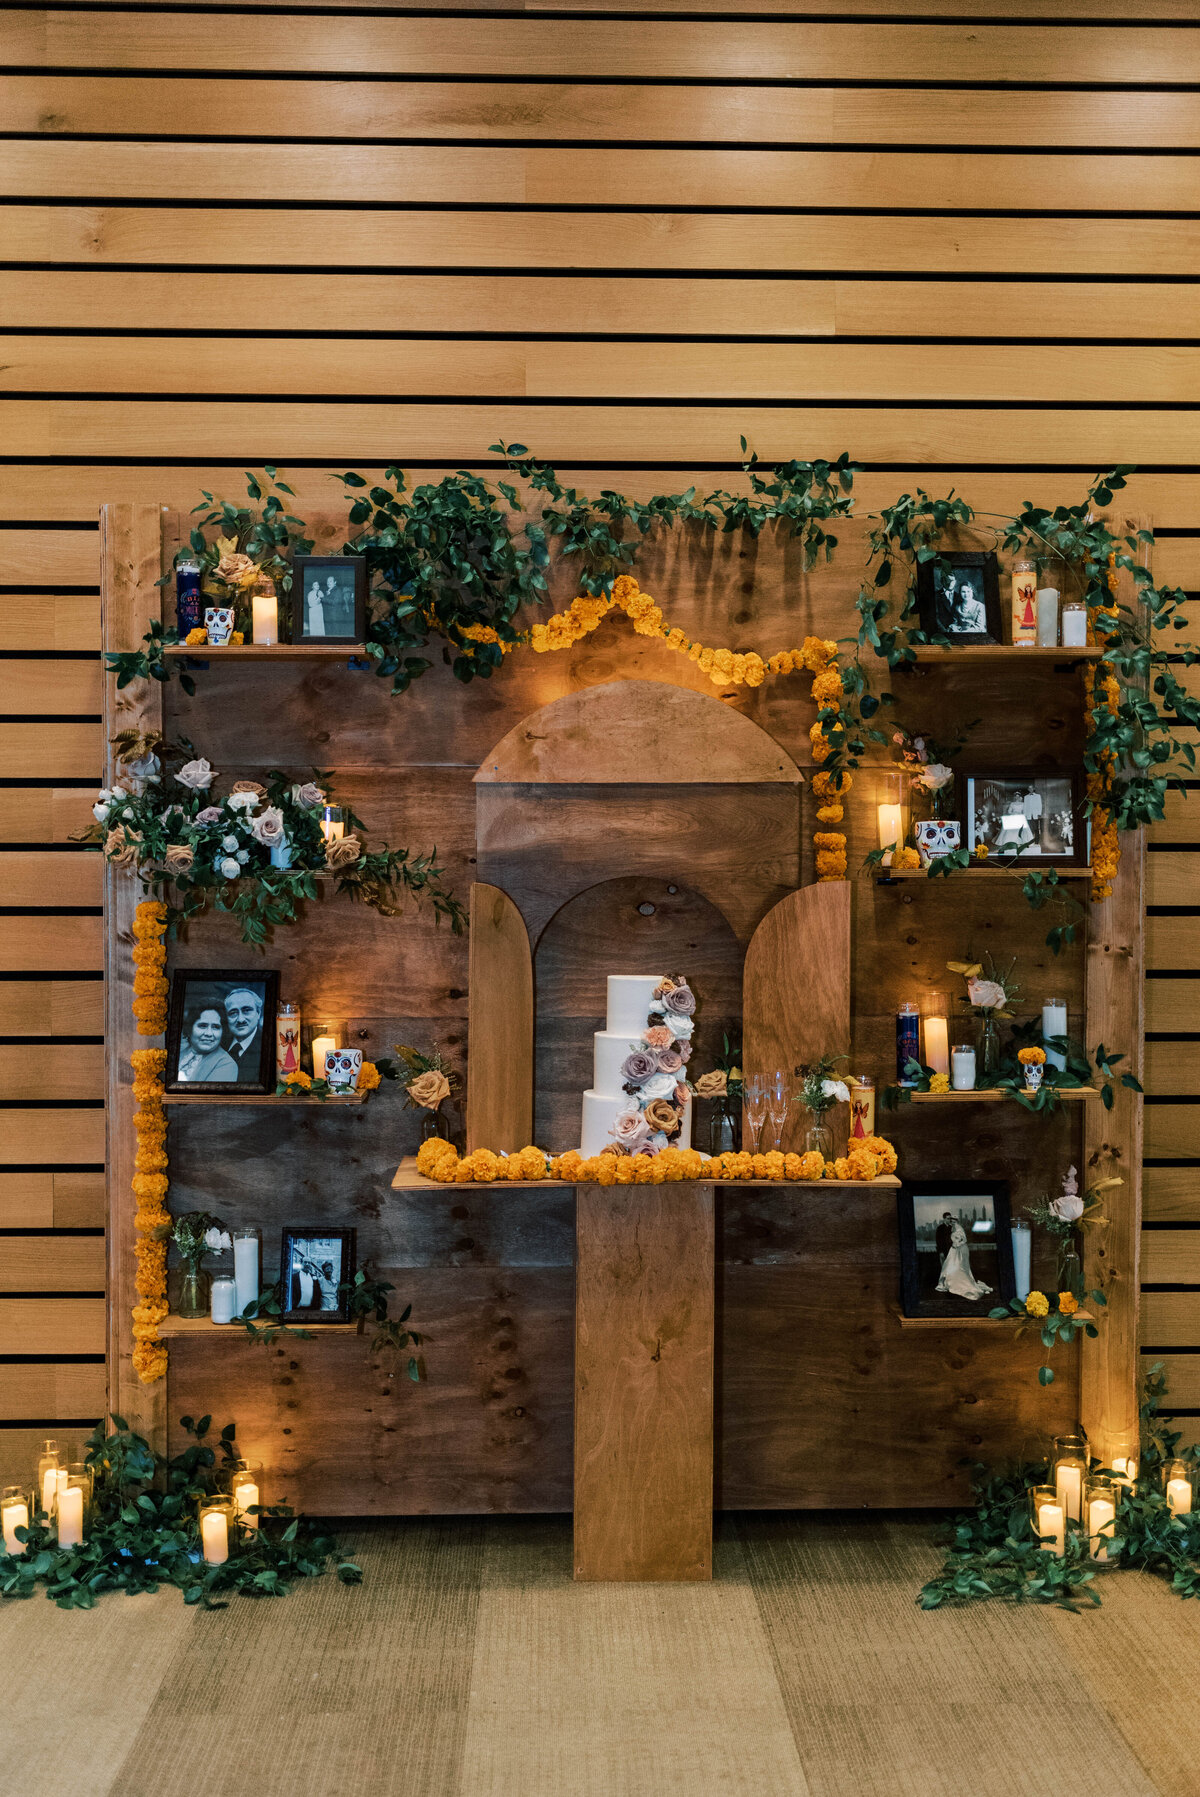 Wooden wedding backdrop design with wedding cake, photos, and greenery